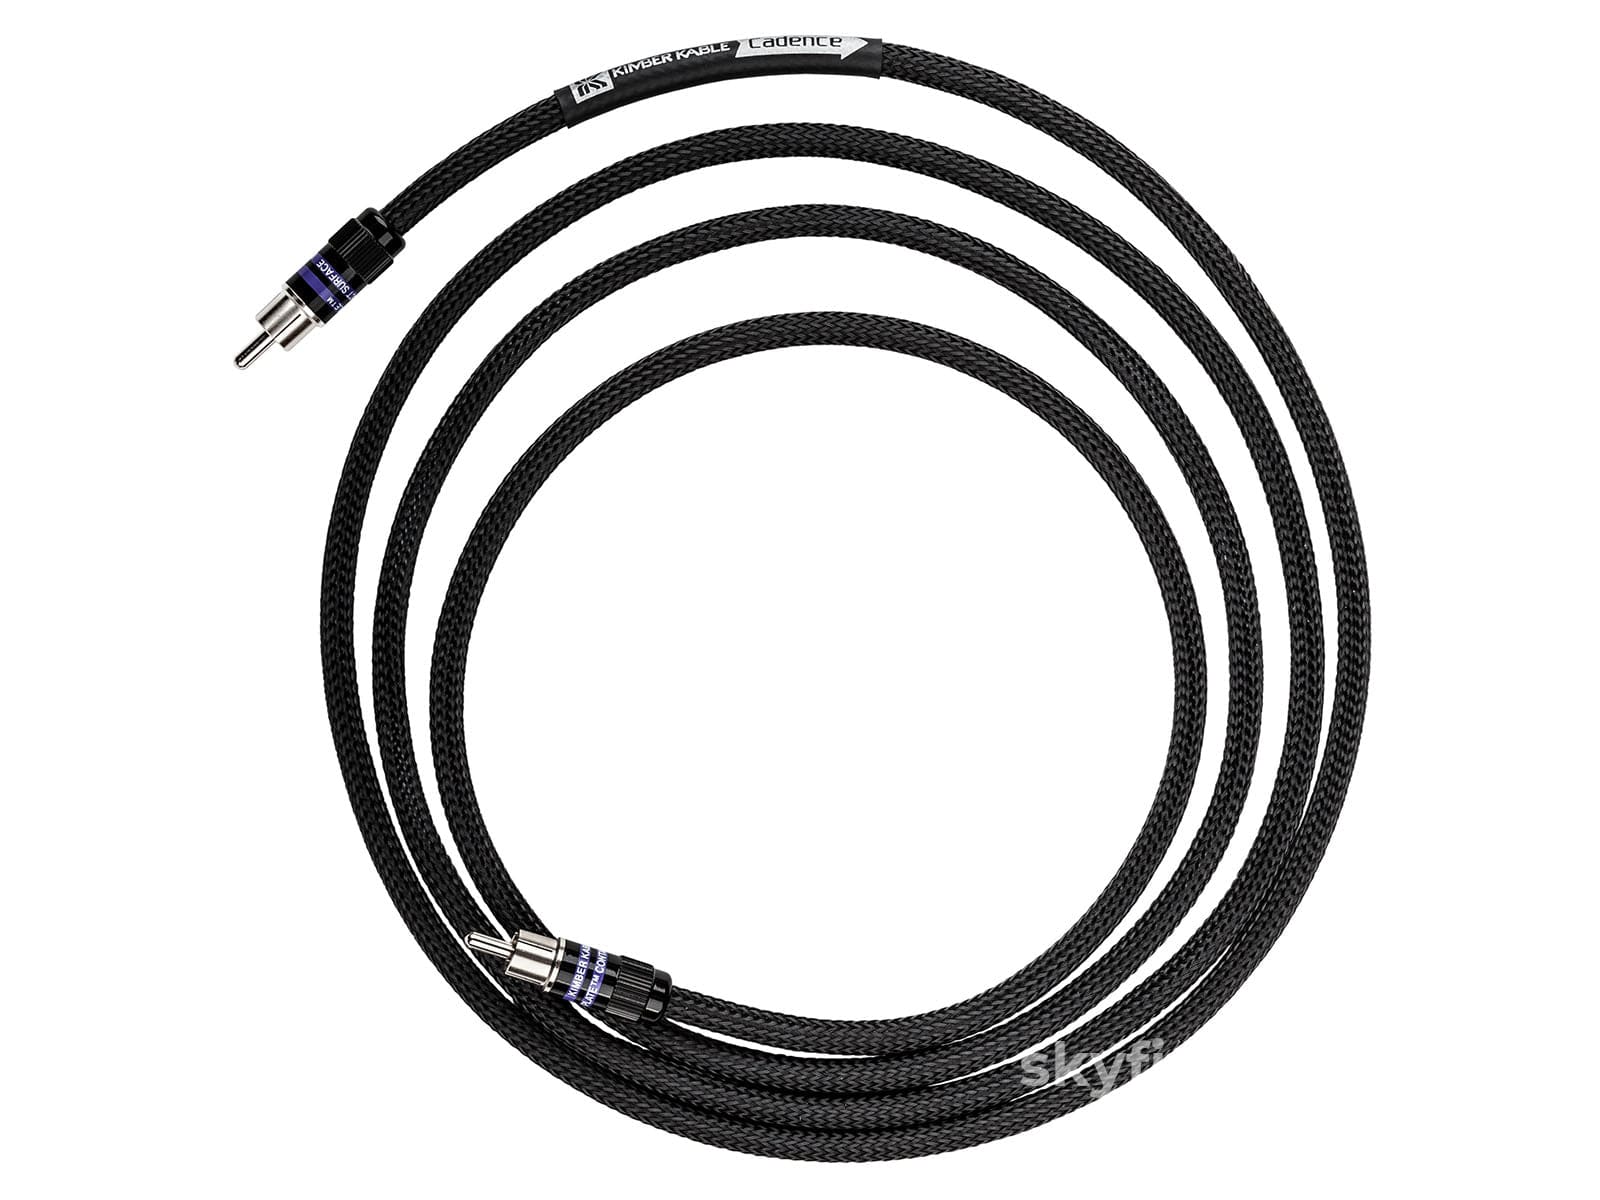 Kimber Kable Cadence Subwoofer Interconnect - Rca Or Wbt Terminations New Cables